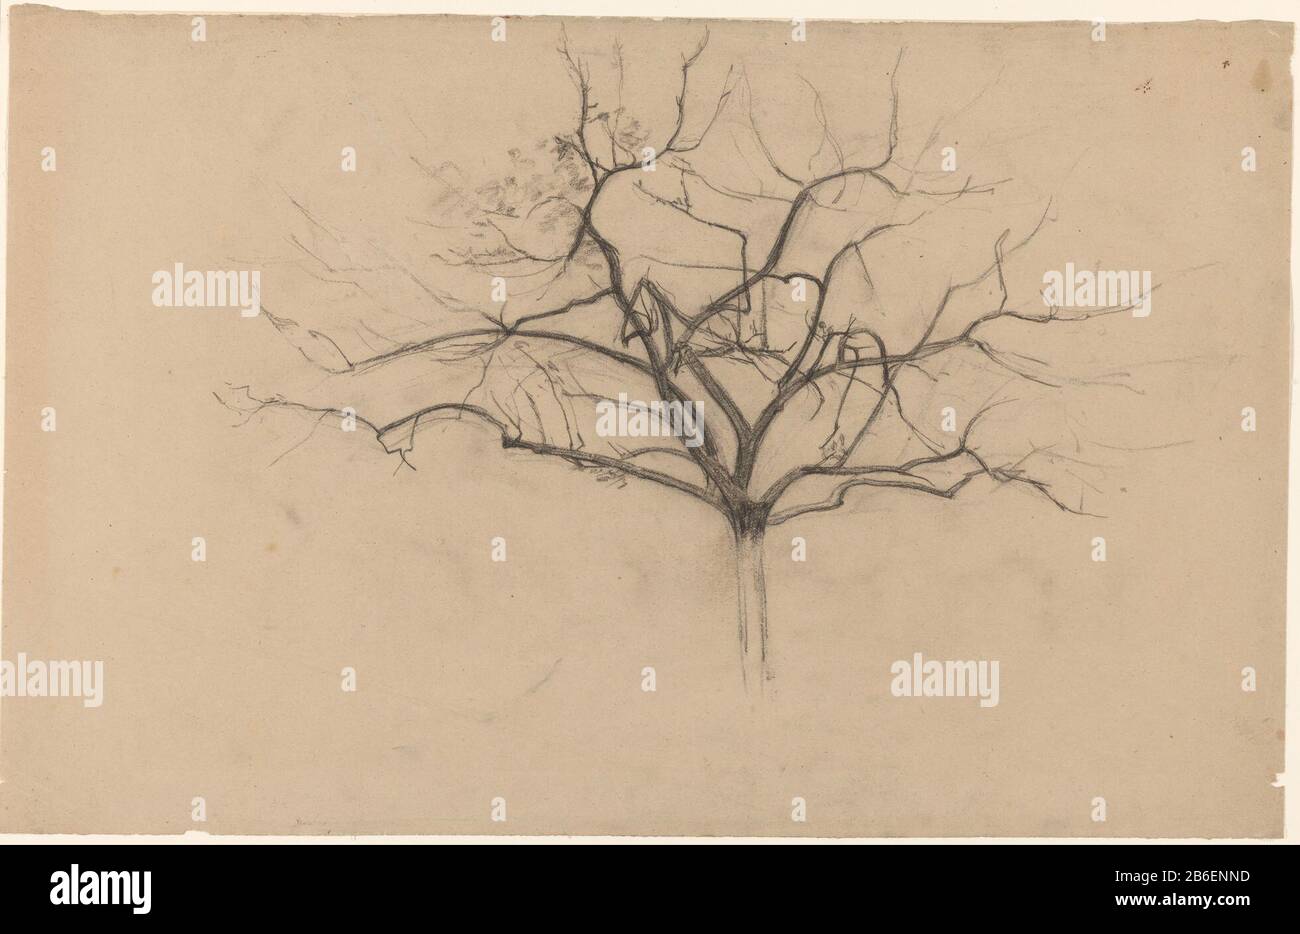 Boomstudie Tree Study Object Type: Drawing Object Number: RP-T 1961-141 Manufacturer : artist: Cornelis Gerardus' t Hooft (1791-1871) Date: 1801 - 1871 Caratteristiche Fisiche: Gesso nero materiale: Gesso carta dimensioni: H 353 mm × b 555 mm Oggetto: Albero Foto Stock